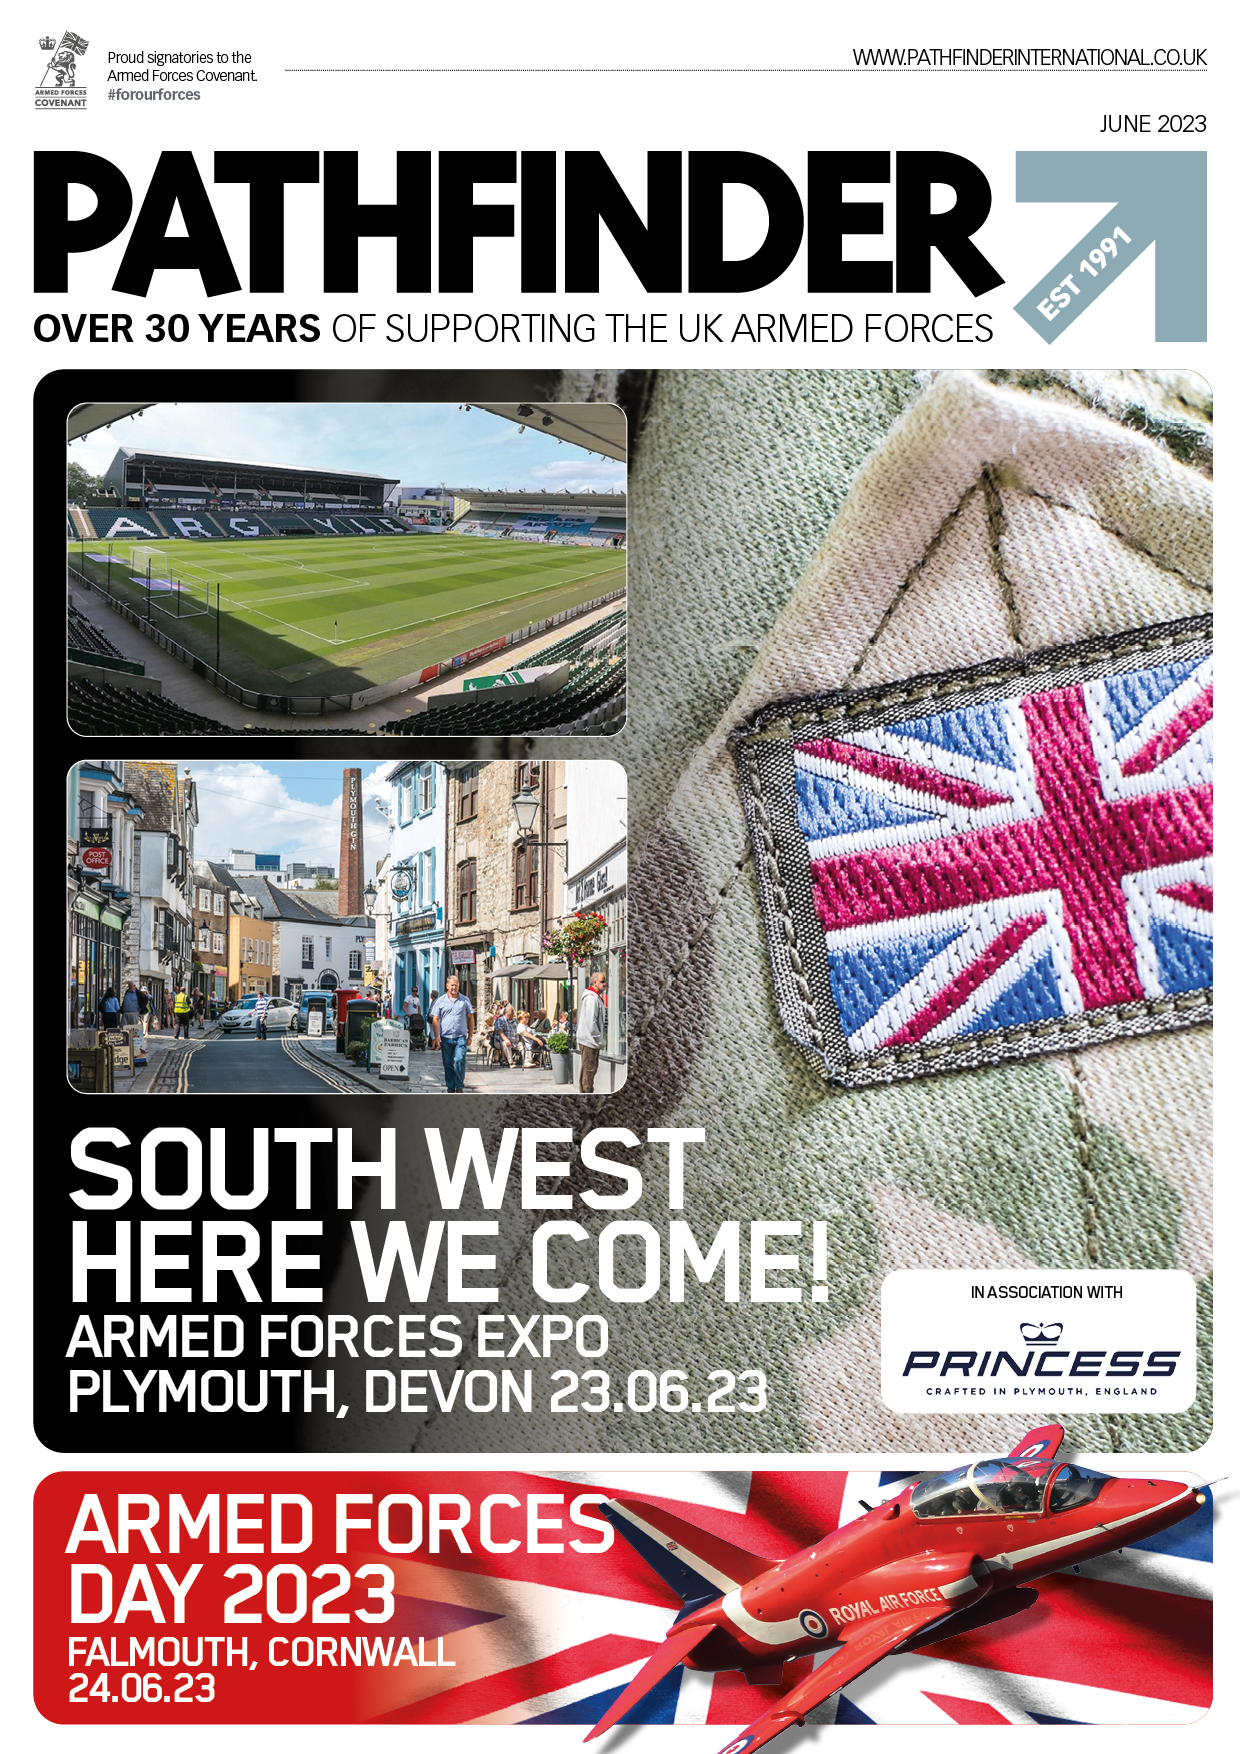 The Armed Forces Day Special Issue Of Pathfinder Is Out Now!